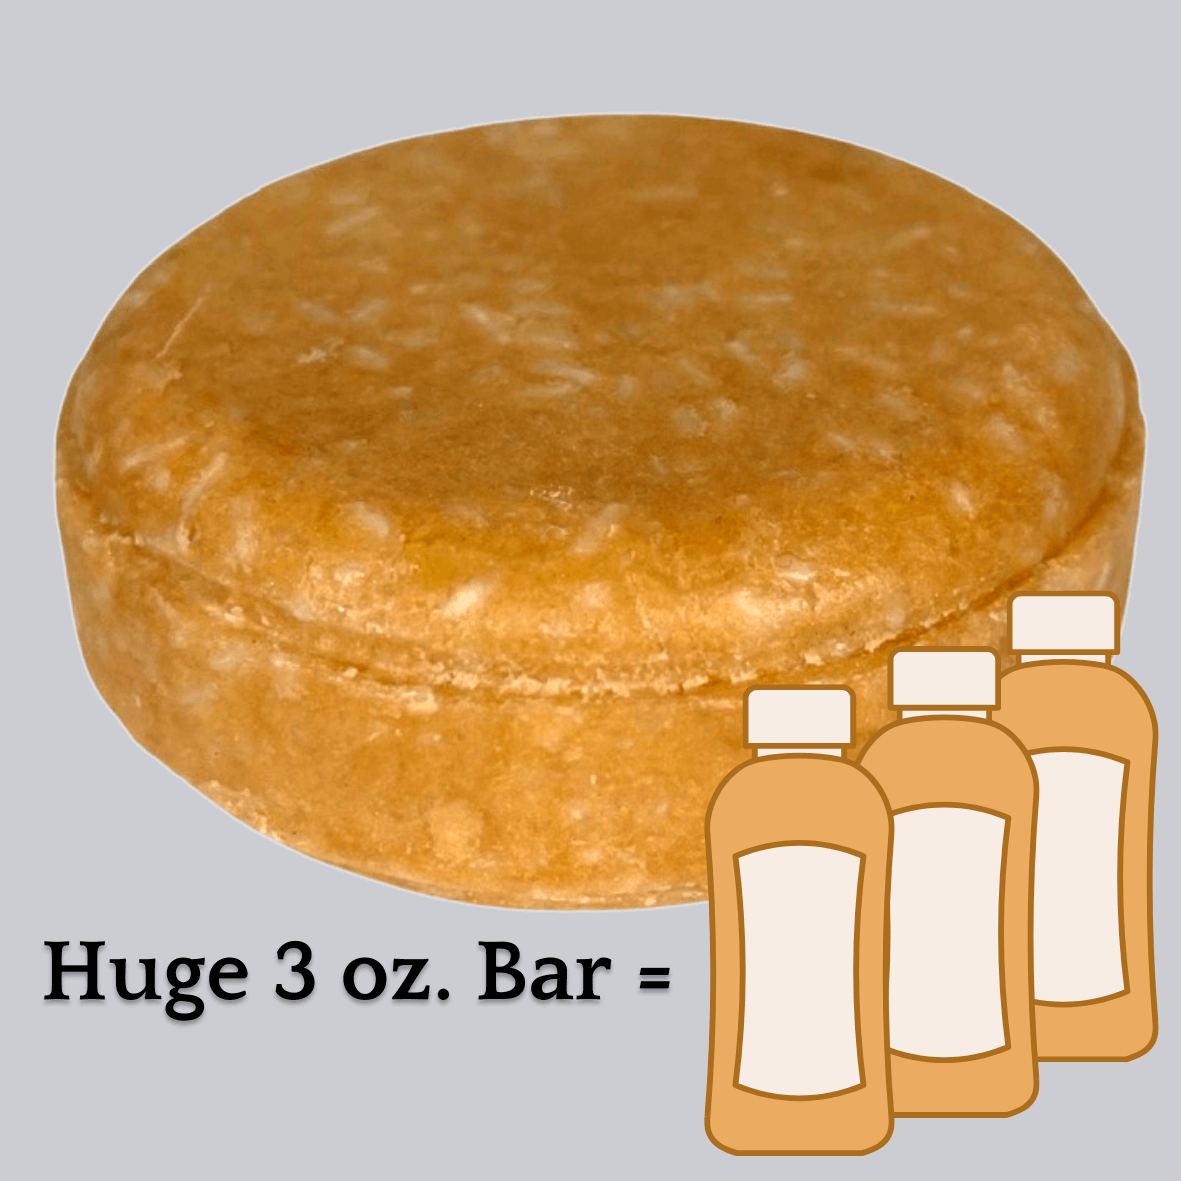 Fawn-colored Honey Oatmeal shampoo bar with text below: "Huge 3 Ounce Bar" equals icon of three bottles of shampoo. Alpaca Soaps AlpacaSoaps